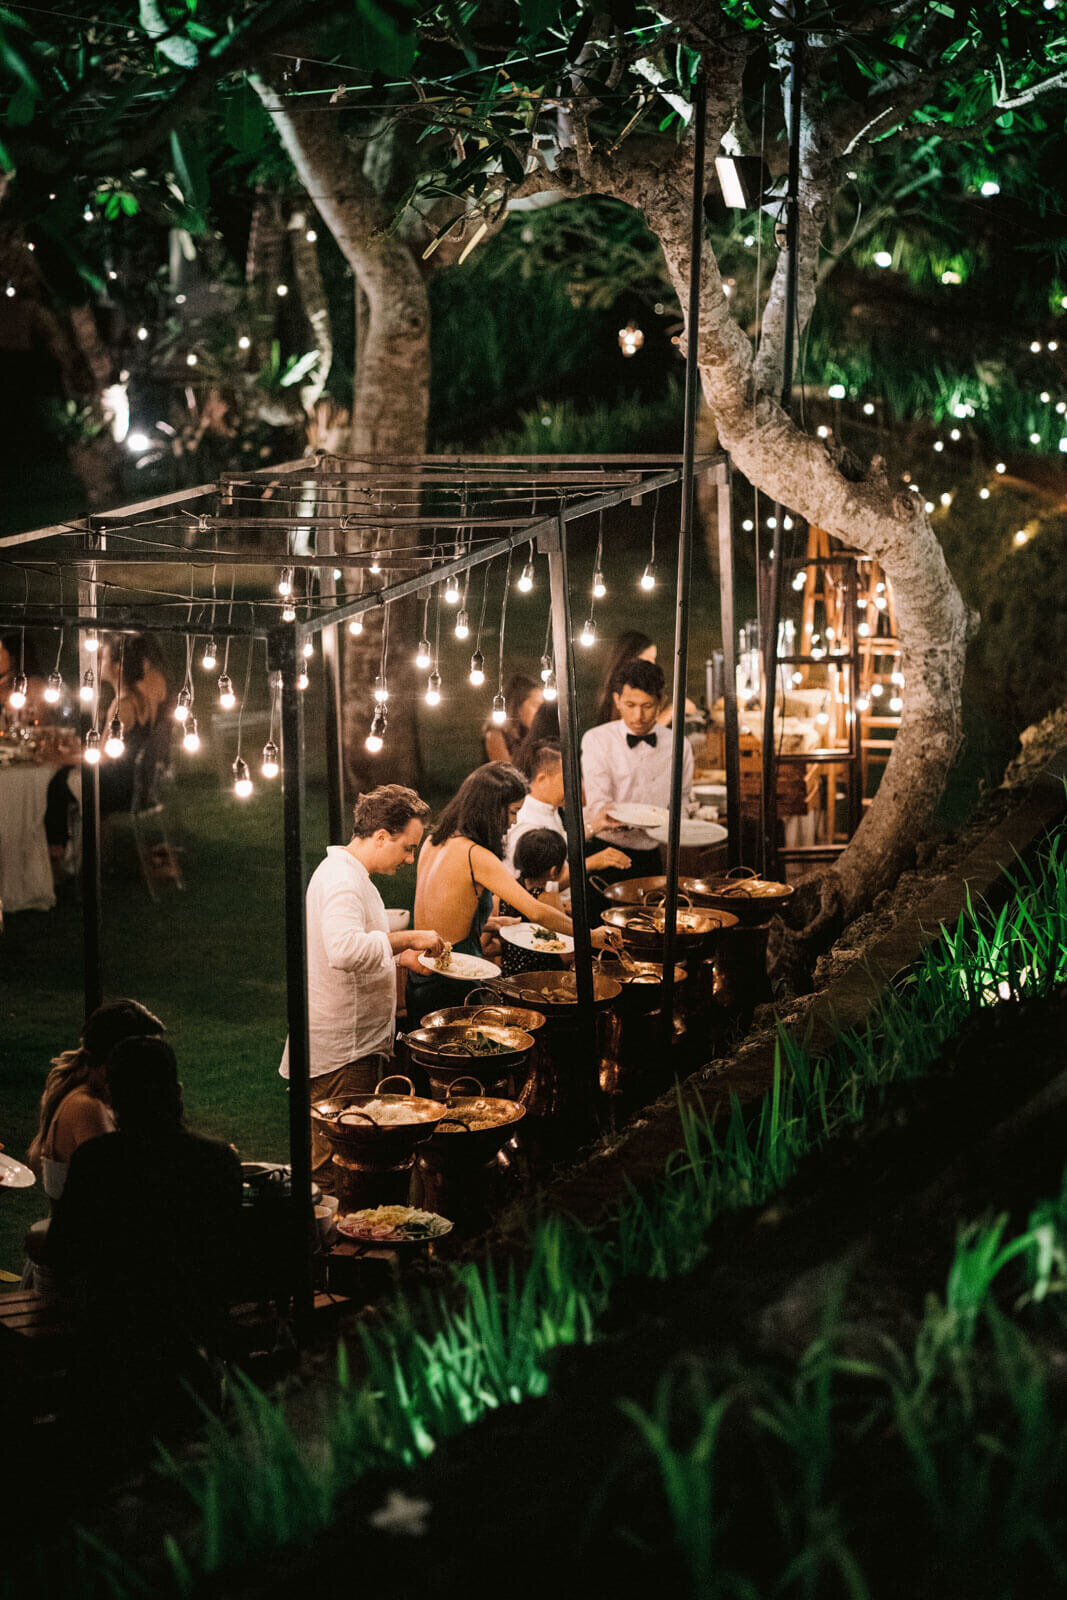 The wedding guests are getting food in the outdoor buffet area in Khayangan Estate, Bali, Indonesia. Image by Jenny Fu Studio